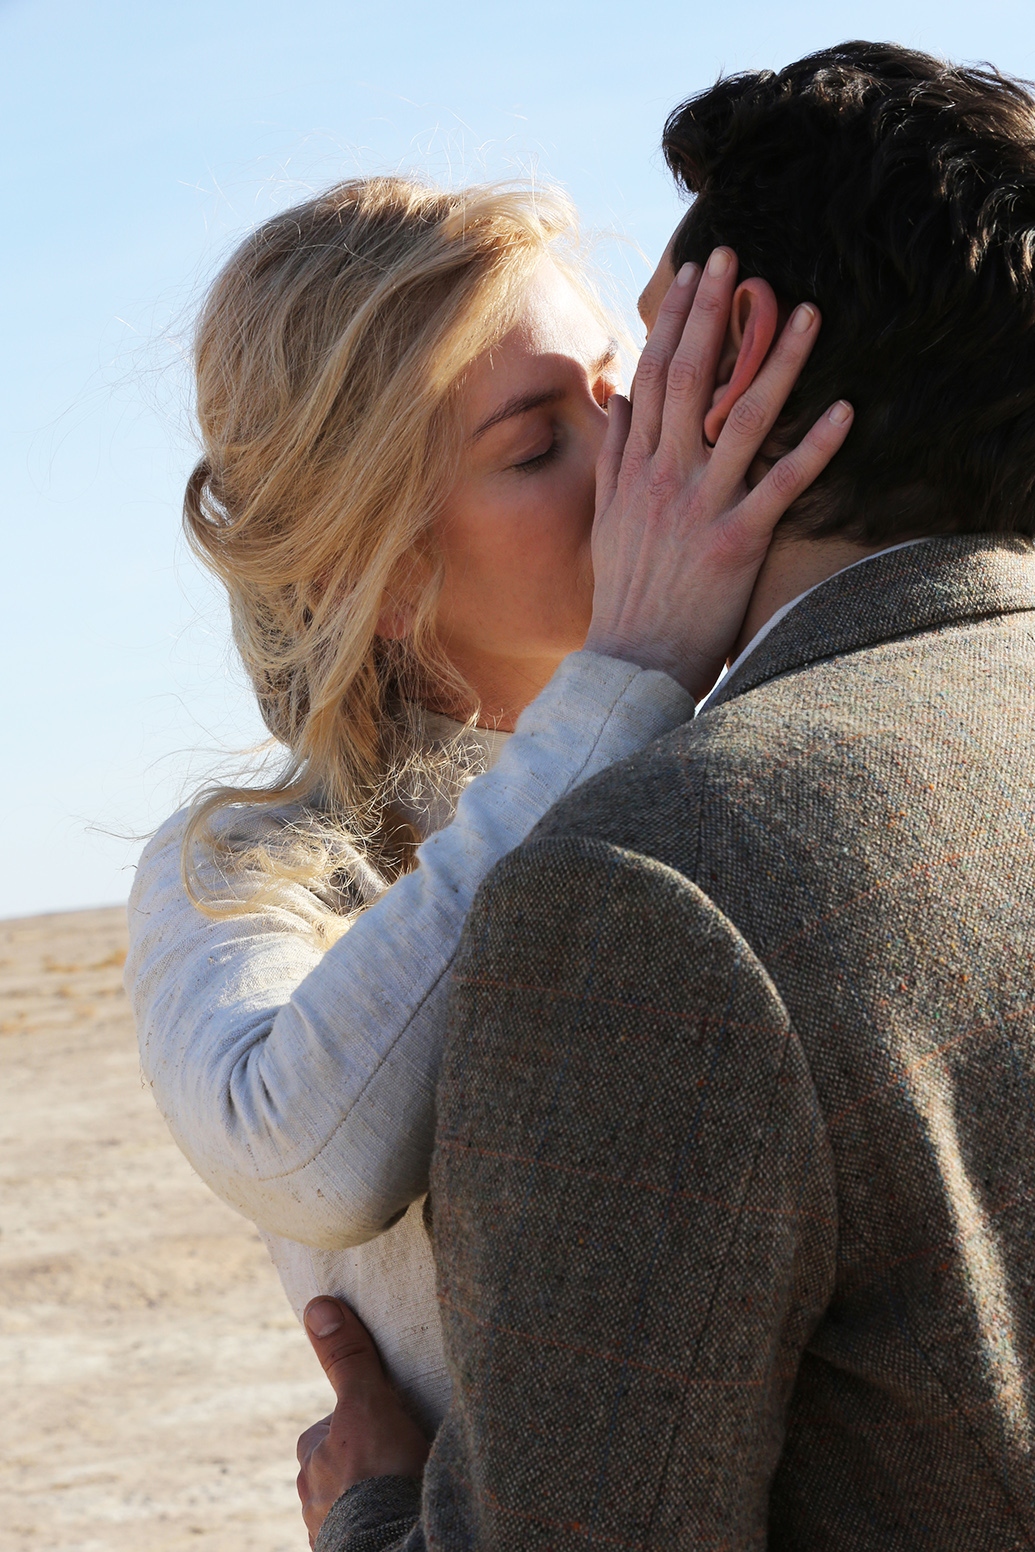 A blonde woman and a dark-haired man are kissing, she holds his face in her hands.